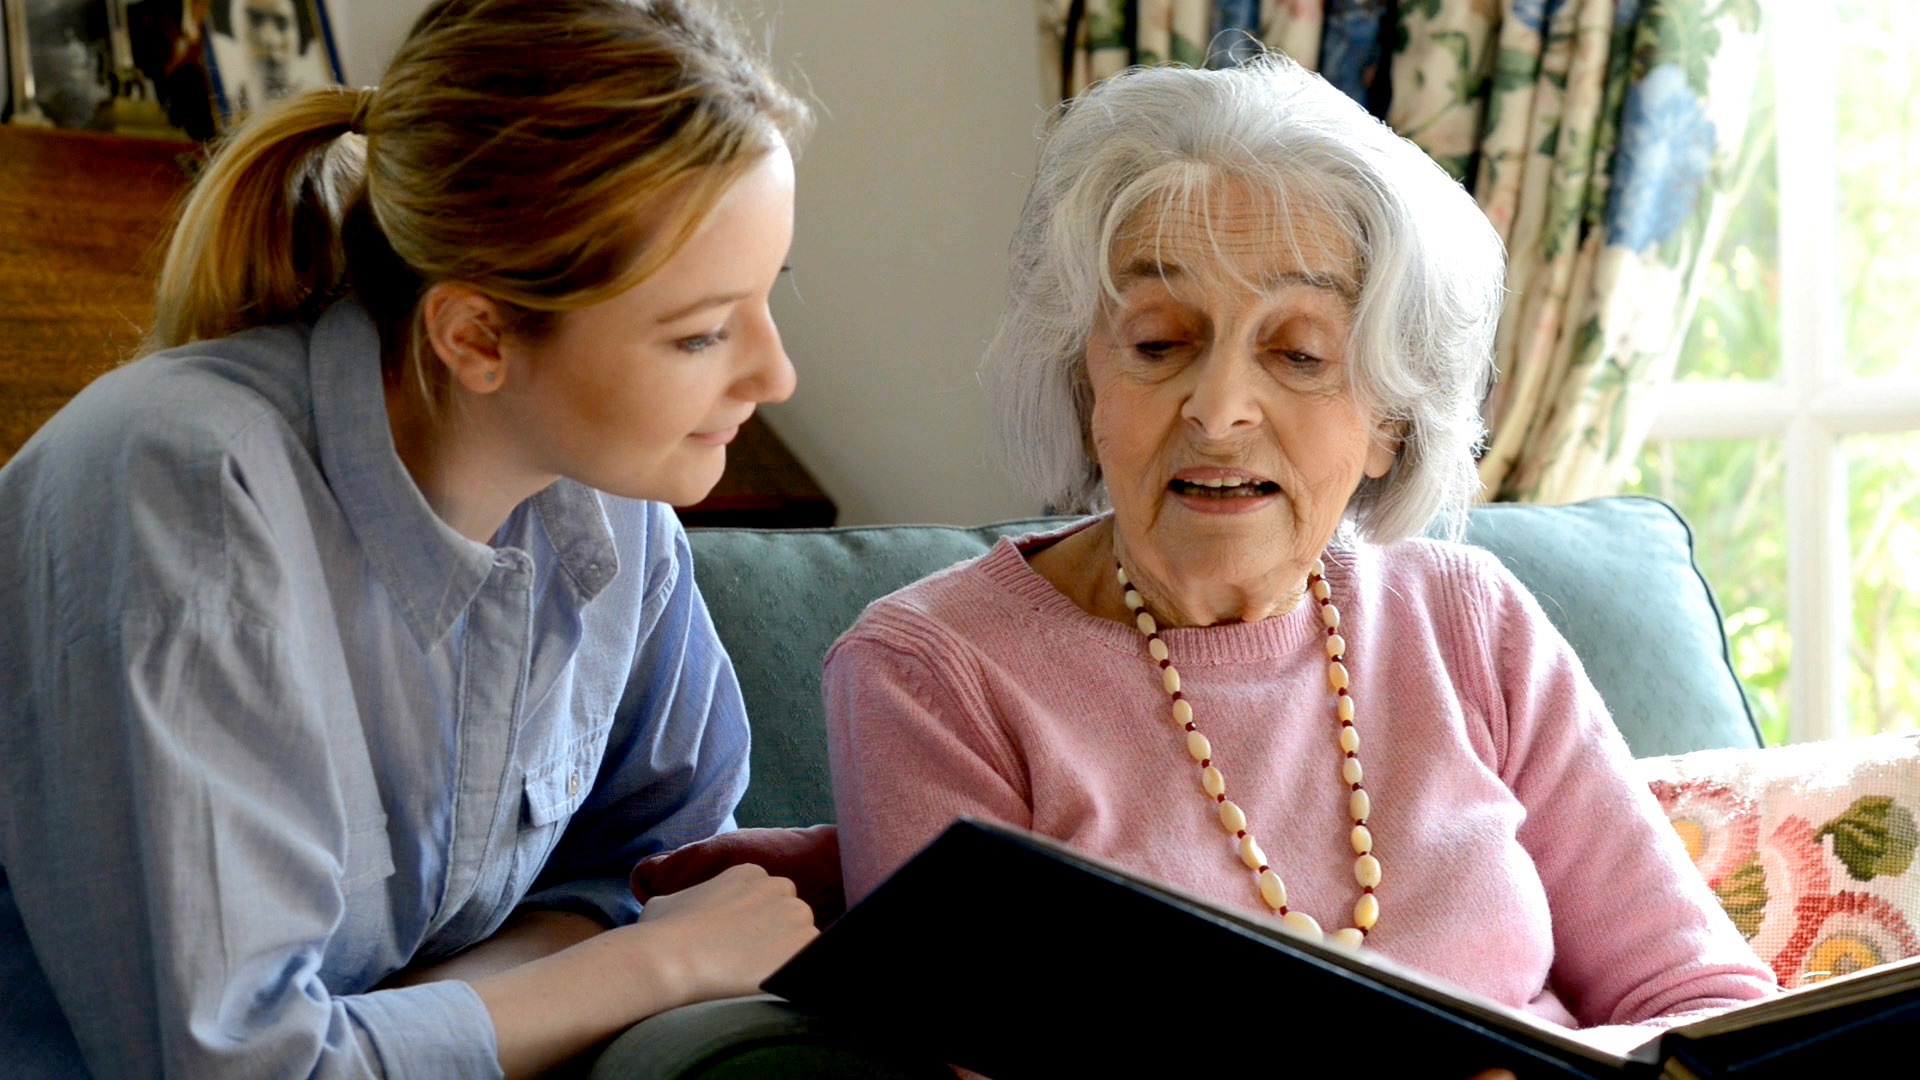 An elderly woman looking at a book with a younger woman